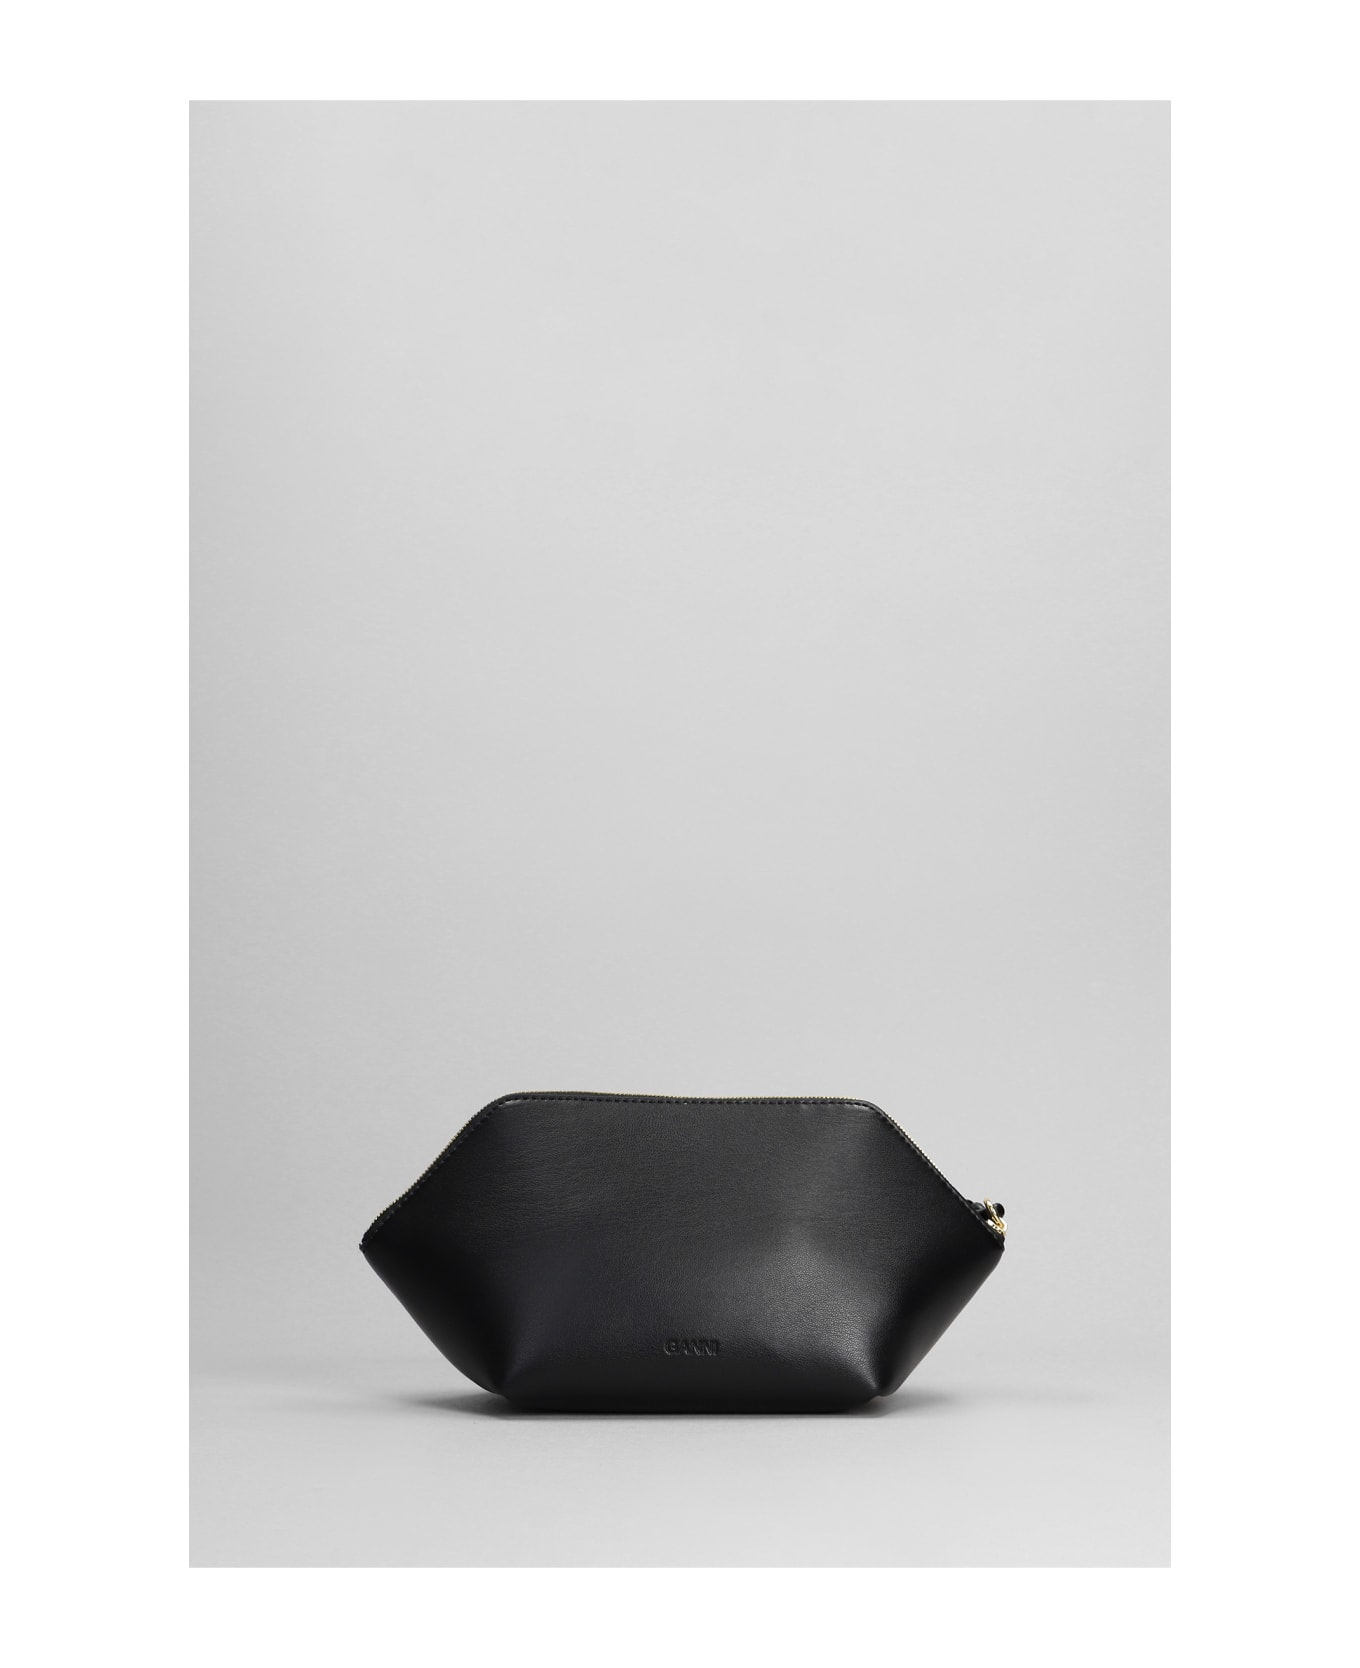 Ganni Bou Zipped Hand Bag In Black Leather - black クラッチバッグ